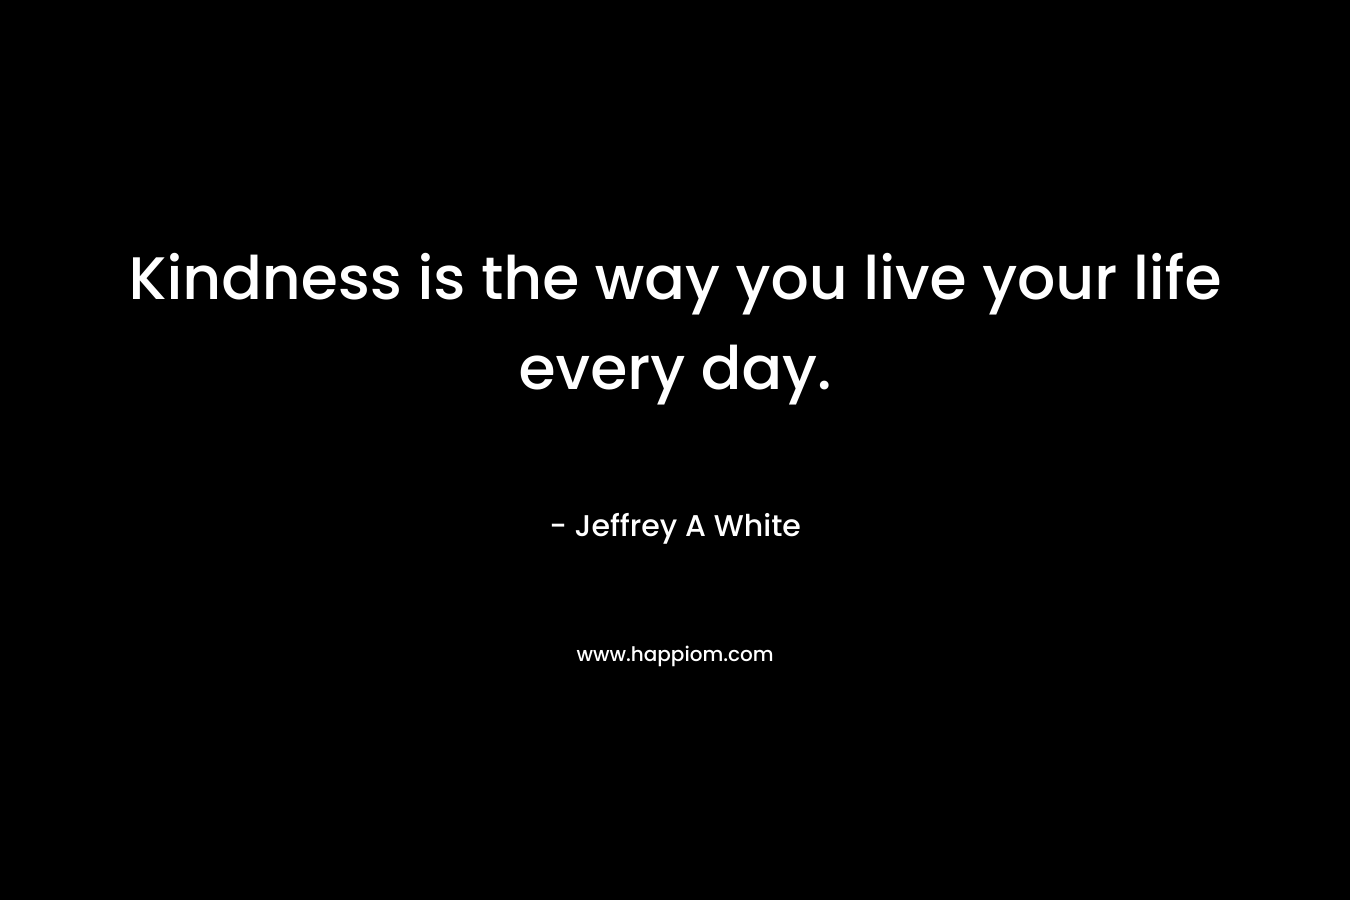 Kindness is the way you live your life every day.